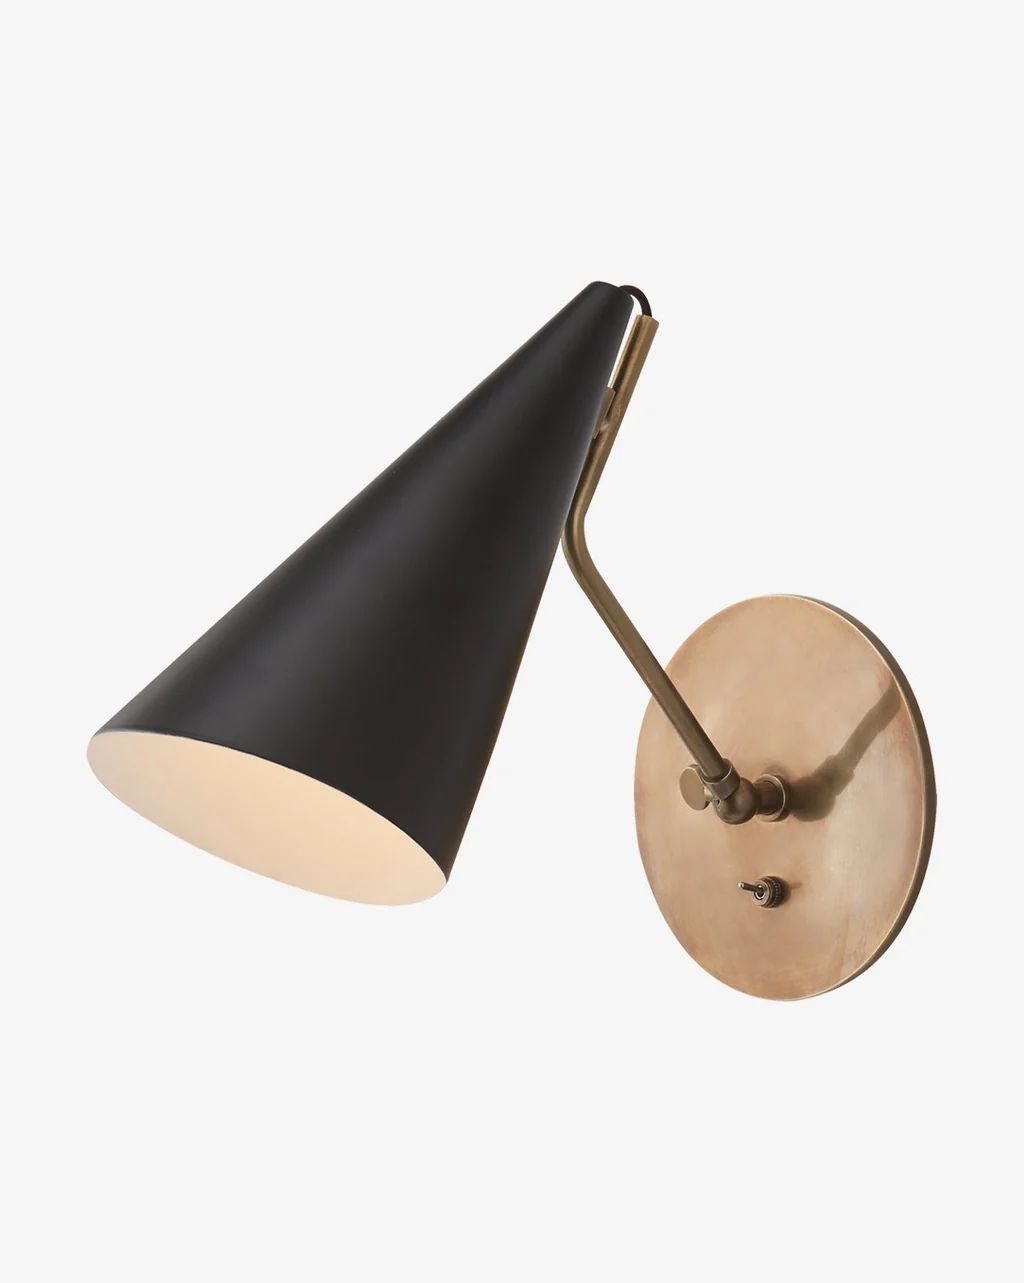 Clemente Single Sconce | McGee & Co.